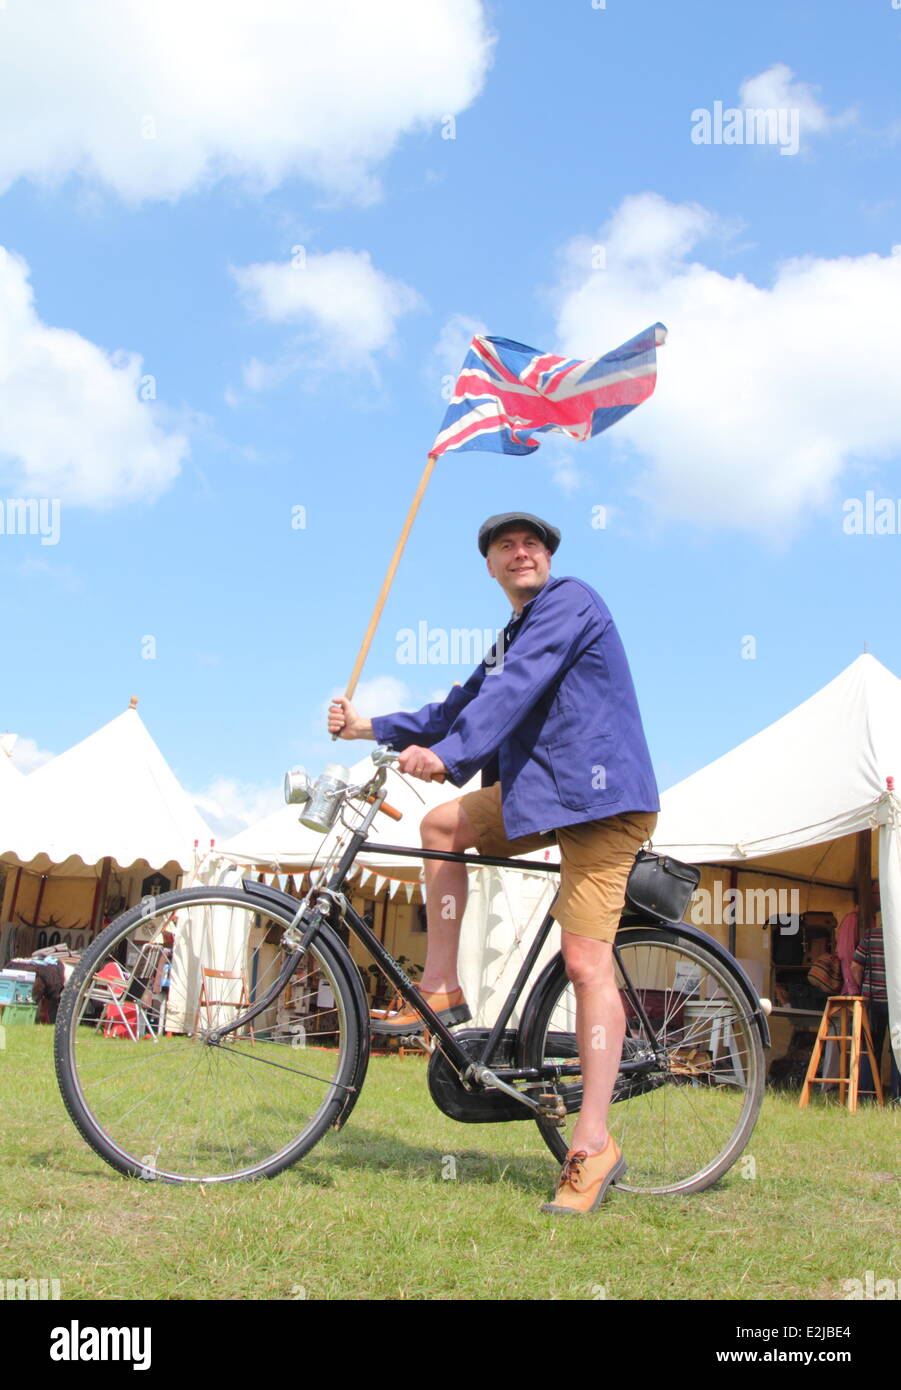 Bakewell, Derbyshire, UK 20 June'14. Simon Doughty from Leicestershire gets into the spirit of the inaugural L'Eroica Britannia festival that celebrates vintage cycling, retro fashion & local gastronomy. An annual cycling festival held in Italy since 1997, this is the first time the event has been held in the UK. At the heart of the festival is a three route tour of the Peak District. Sculptor, Simon is signed up to the 30 mile tour, riding his 1930's former Northamptonshire police force Raleigh bike. © Deborah Vernon/Alamy Live News Credit:  Deborah Vernon/Alamy Live News Stock Photo